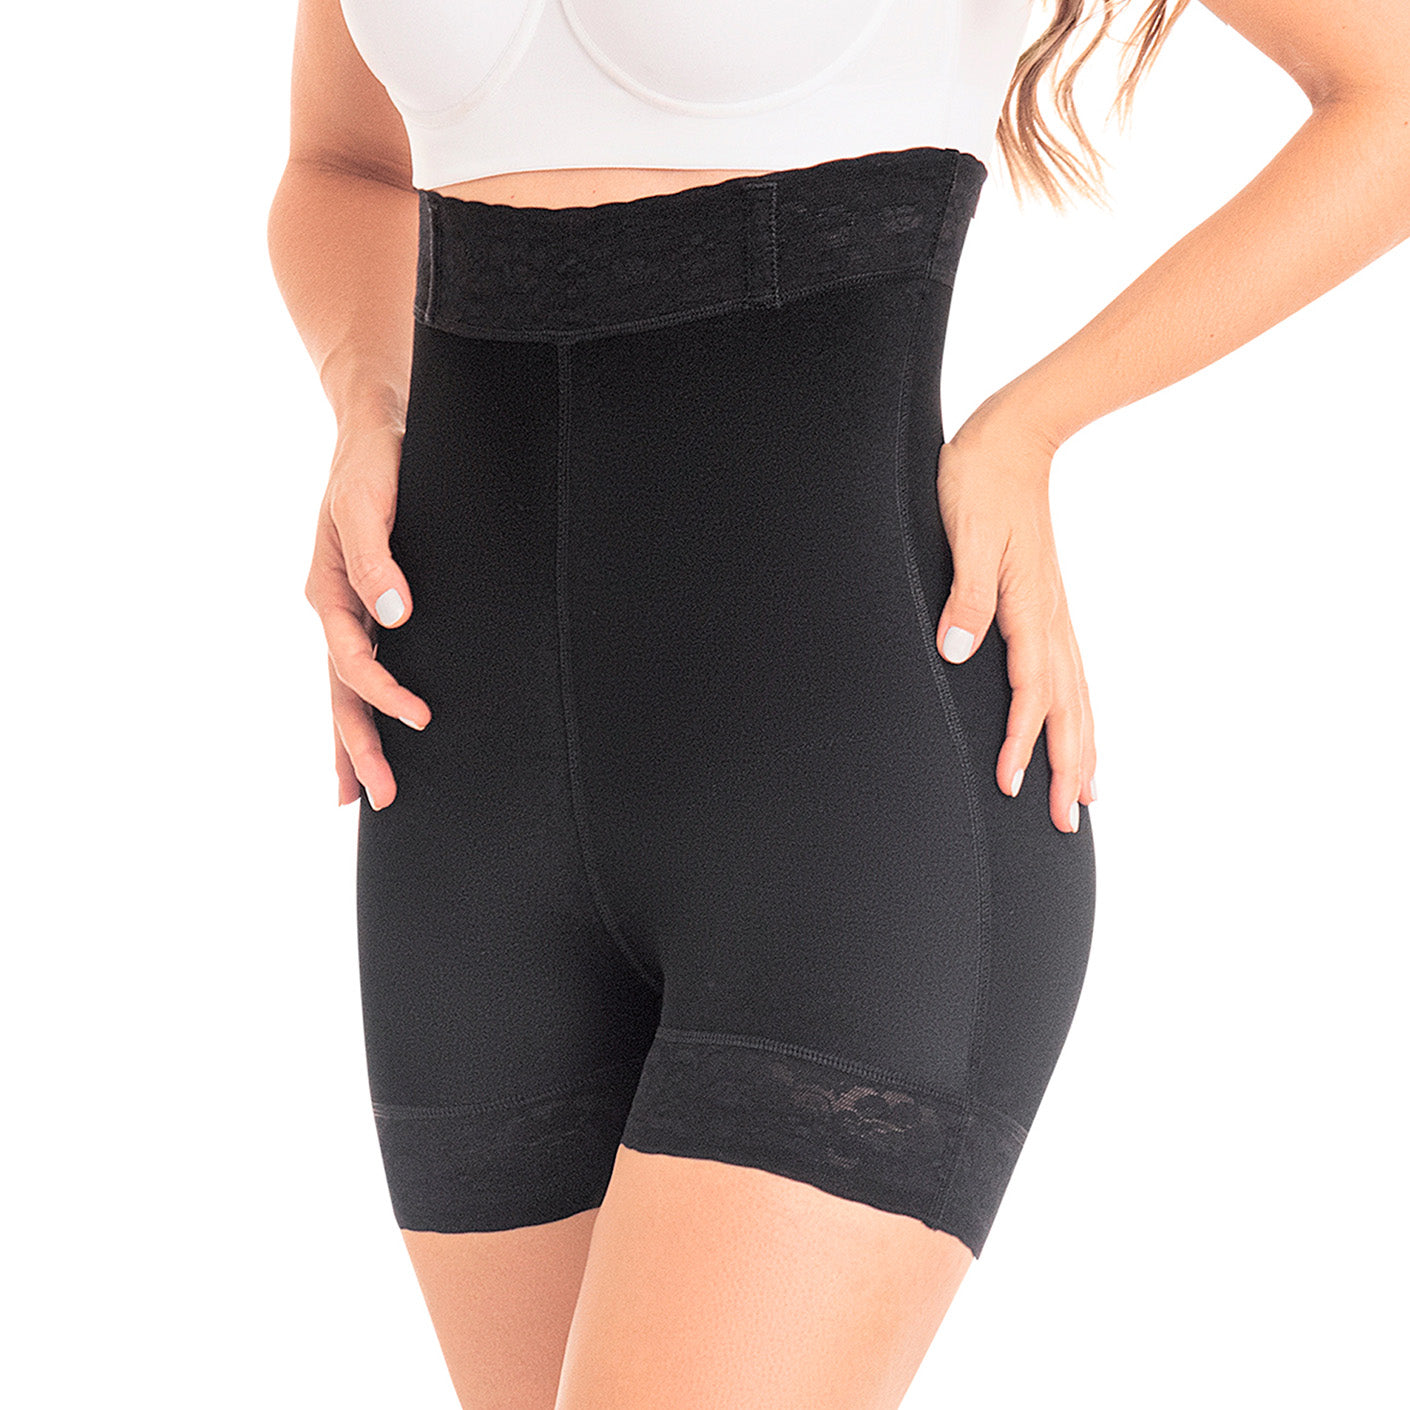 M&D Shapewear: 0216 - Extra High-Waisted Compression Shorts